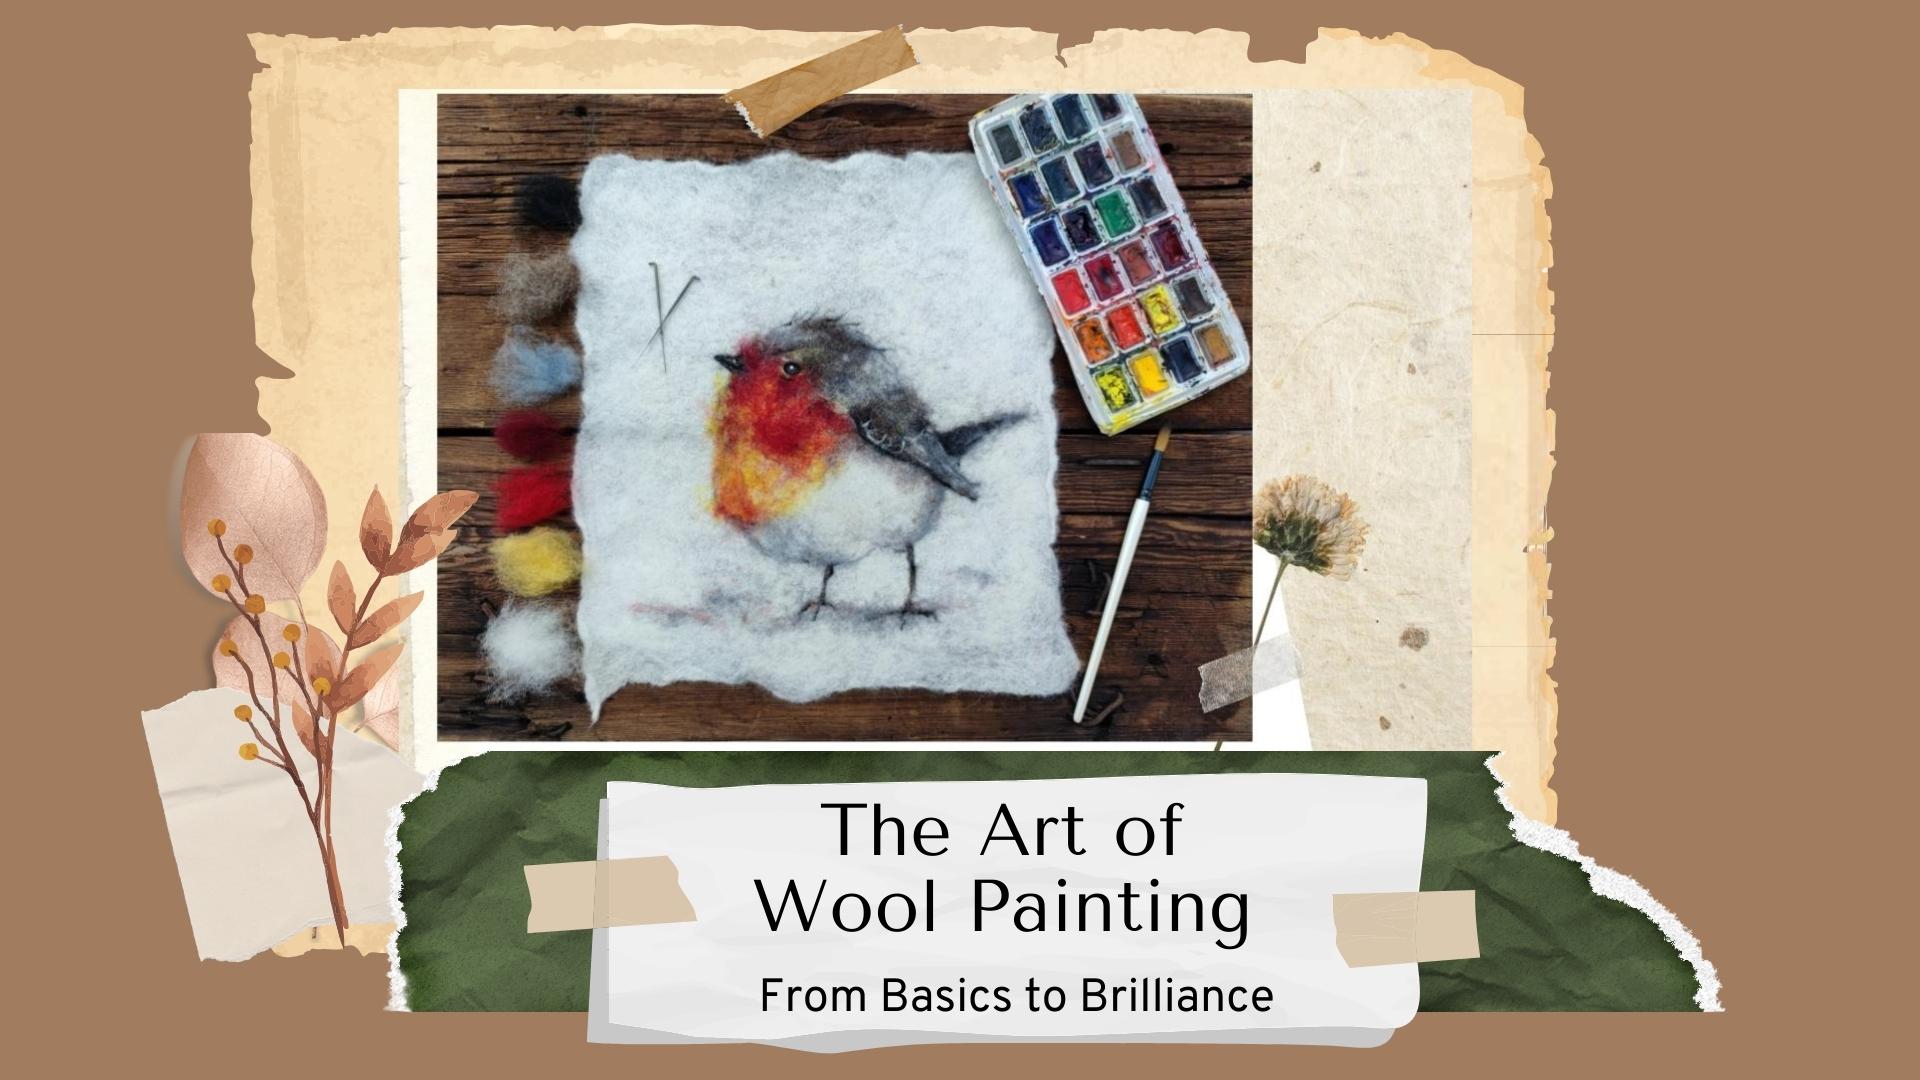 Transformative online course ”The Art of Wool Painting: From Basics to Brilliance”